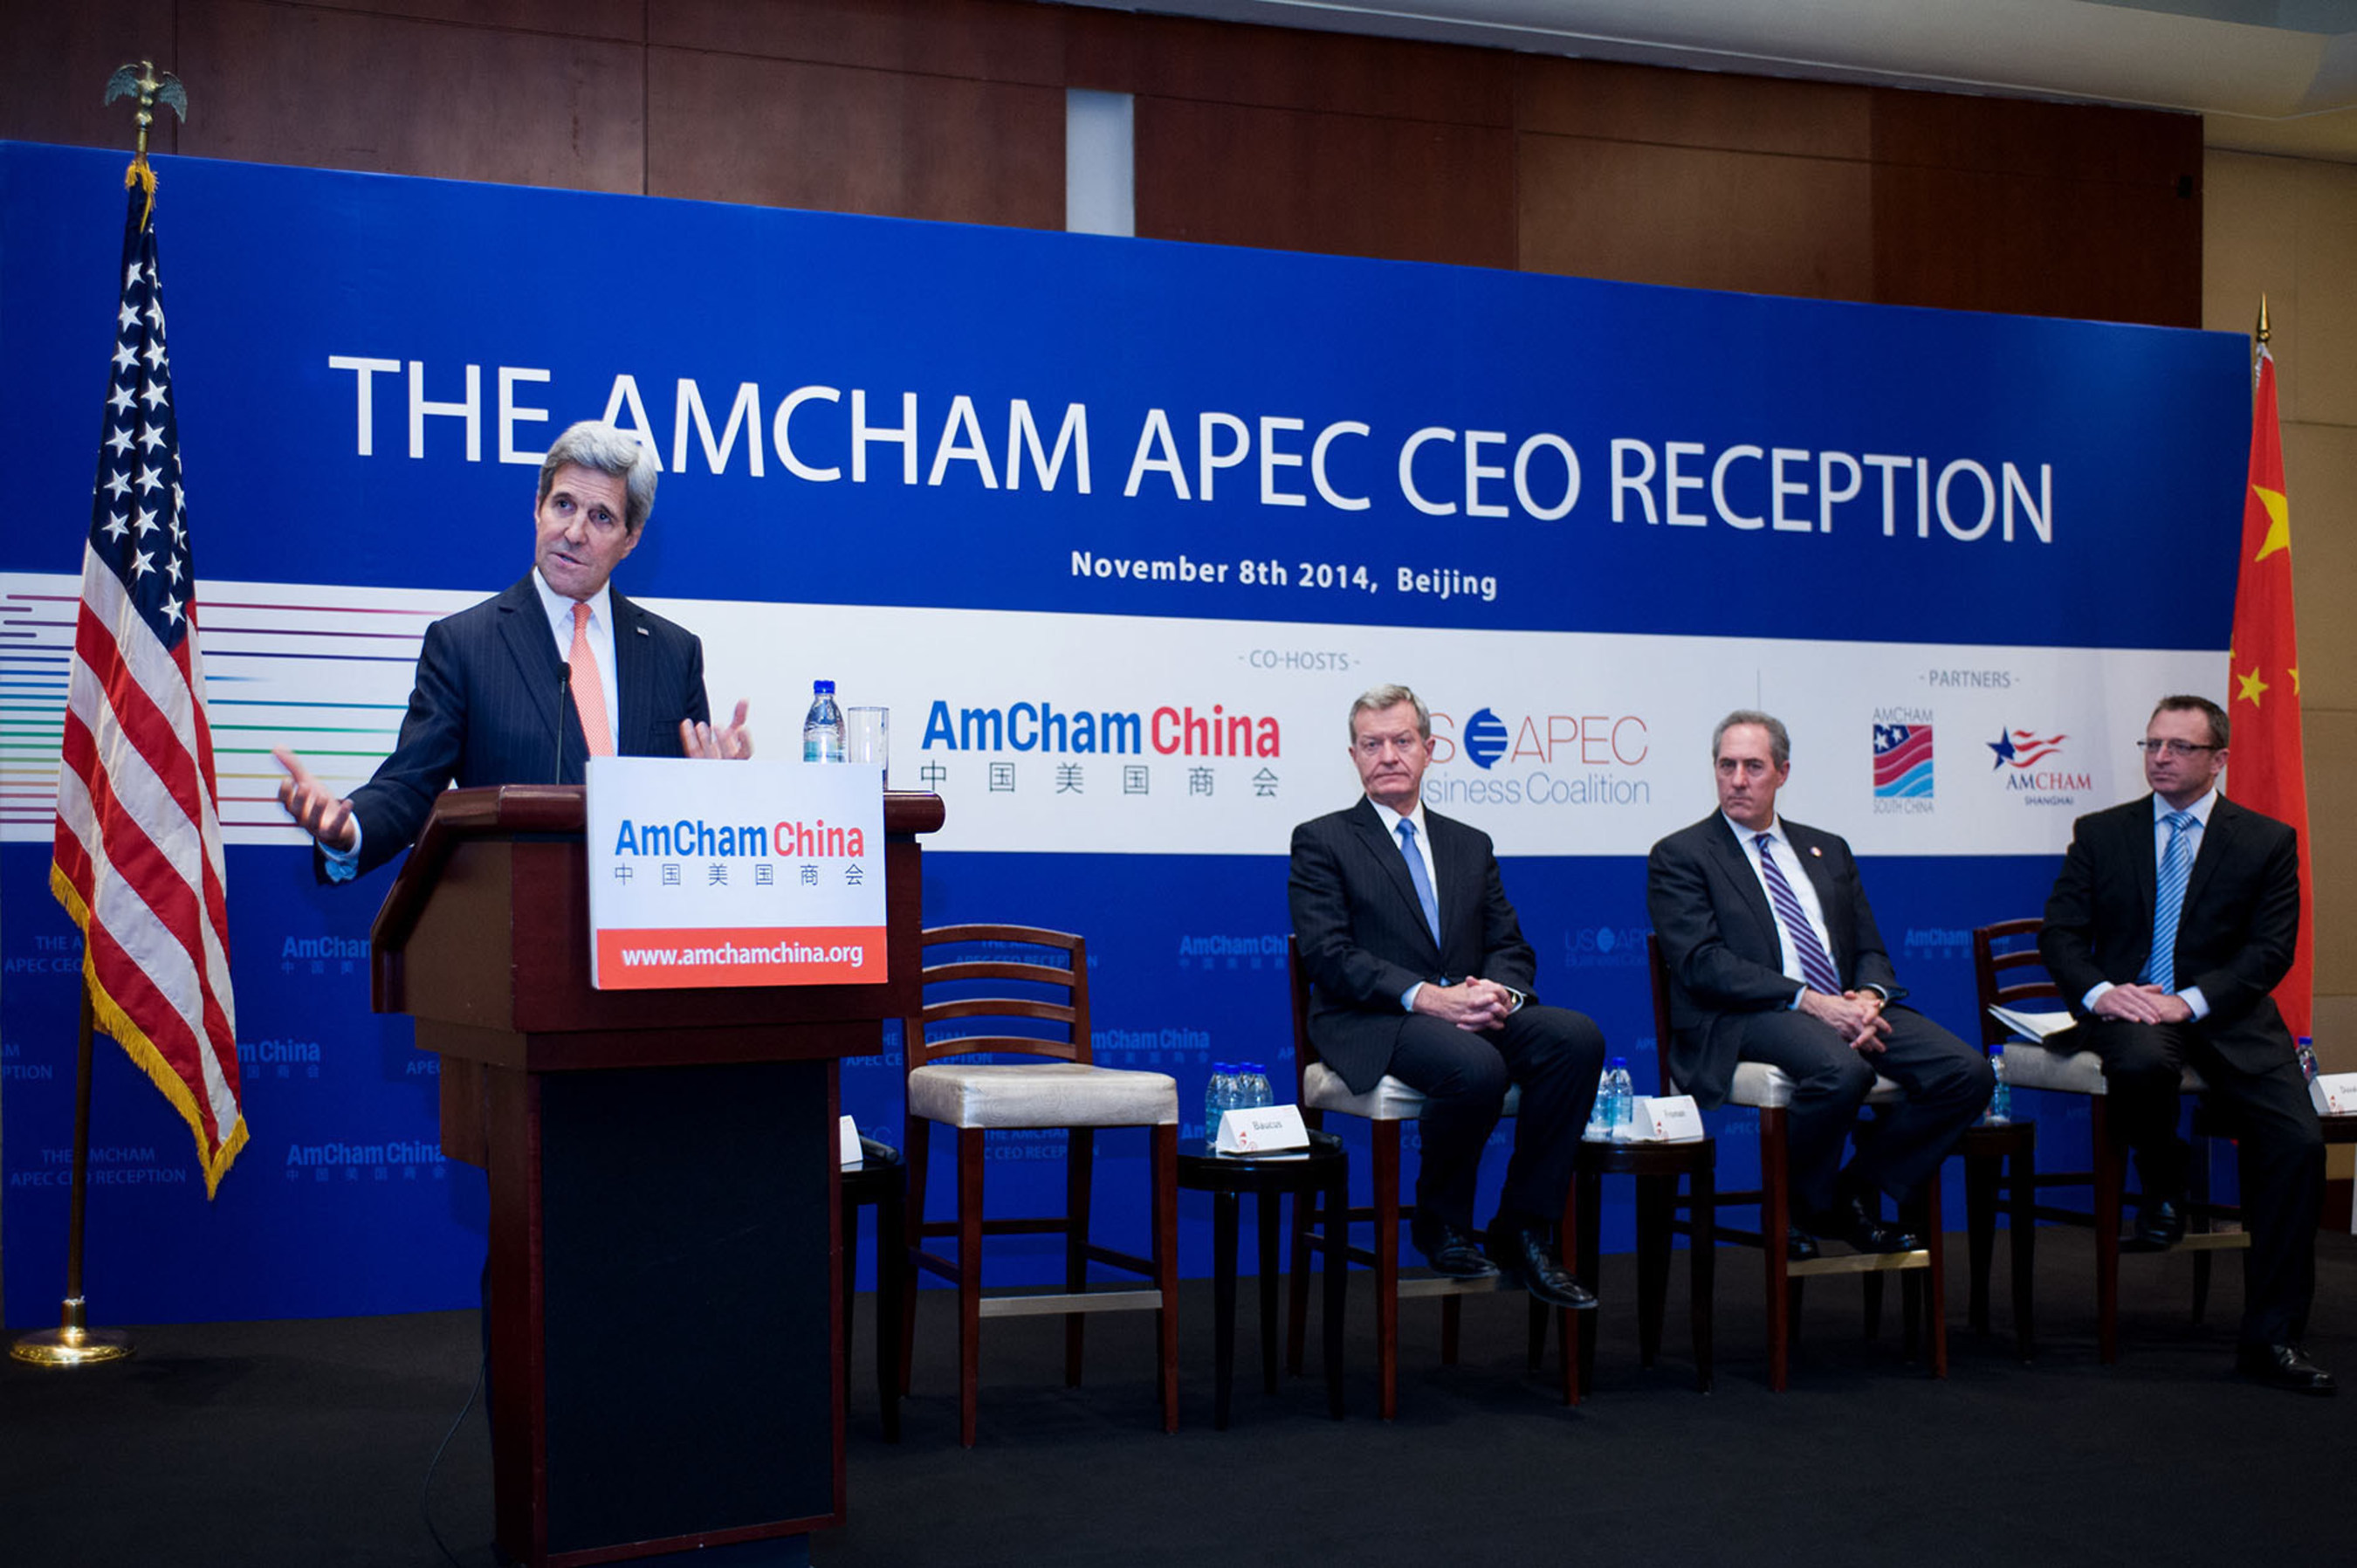 US Secretary of State John Kerry addresses The AmCham APEC CEO Reception in Beijing, watched by US Ambassador to China Max Baucus, US Trade Representative Michael Froman, and American Chamber of Commerce in China President Mark Duval. Photo: AmCham China